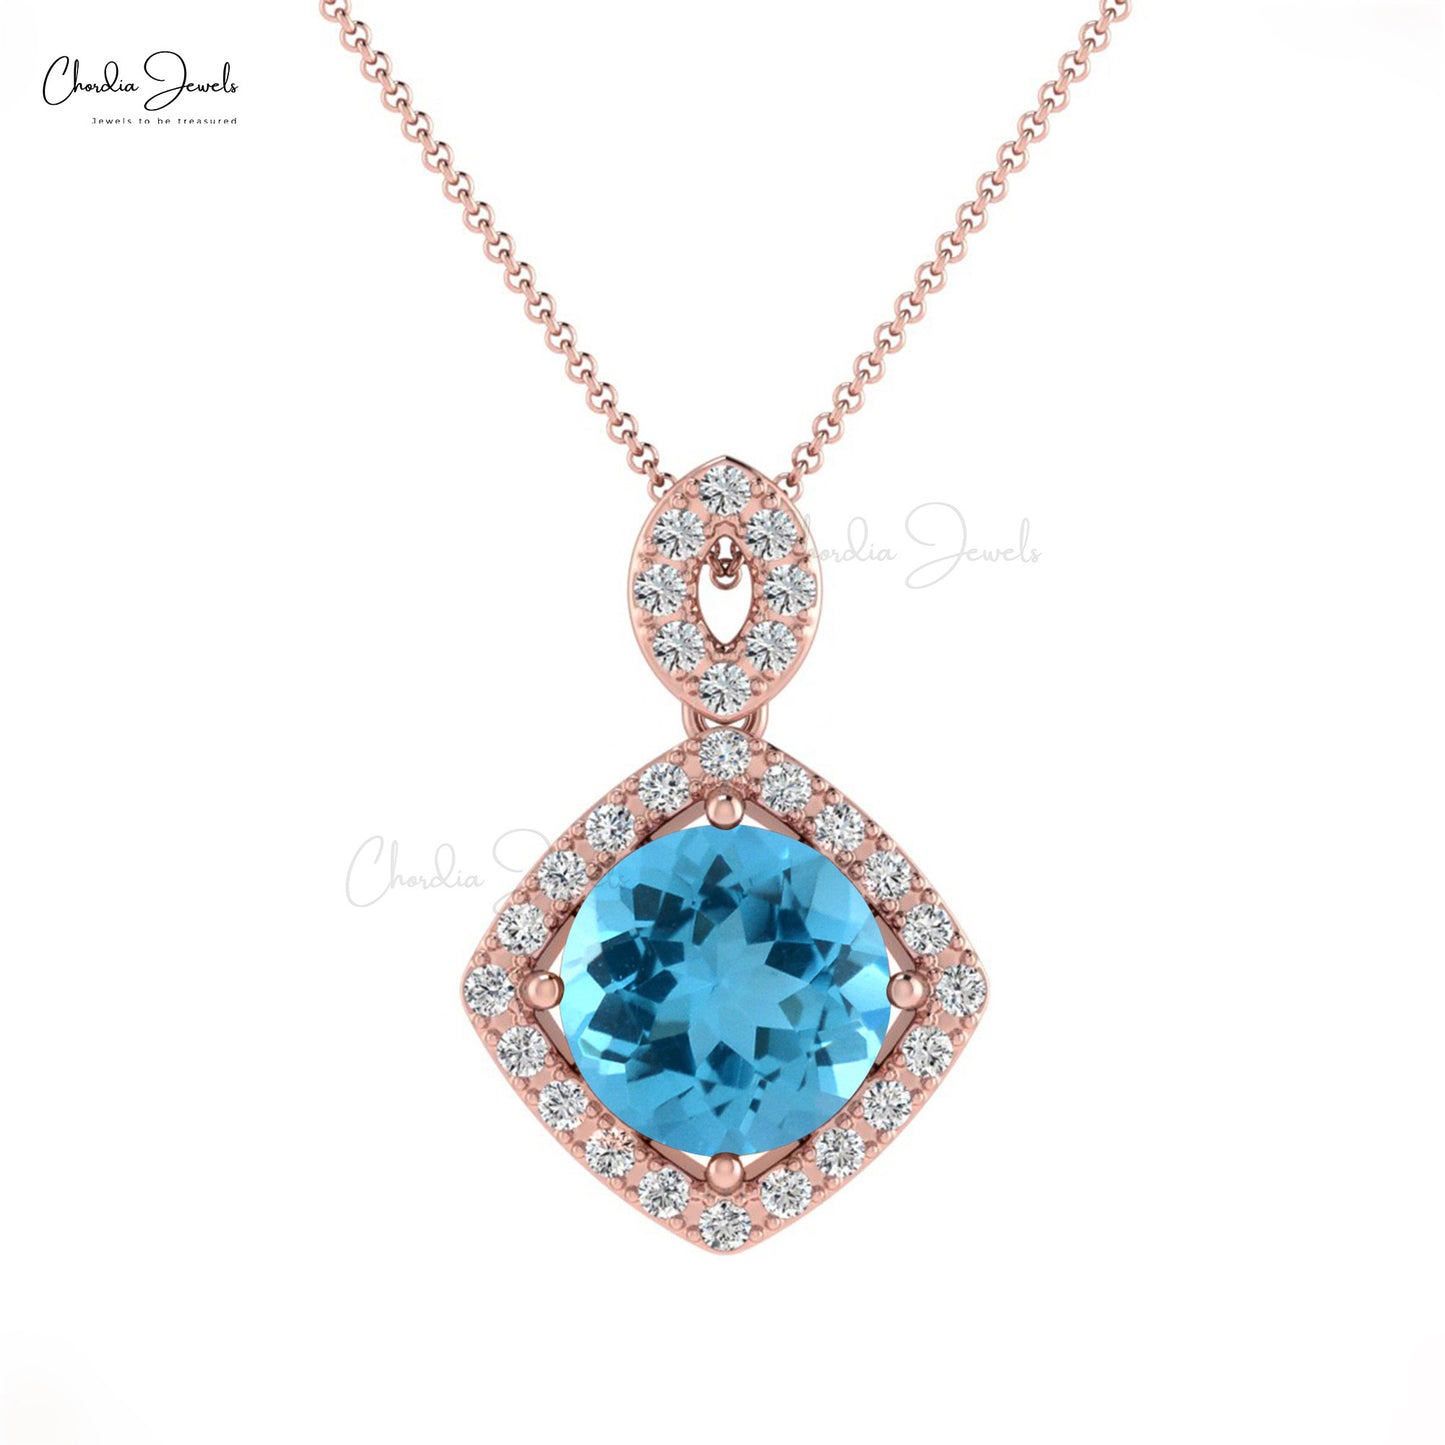 High Quality Modern Luxury Genuine White Diamond Halo Pendant 7mm Round Swiss Blue Topaz Pendant Necklace 14k Real Gold Hallmarked Jewelry For Her